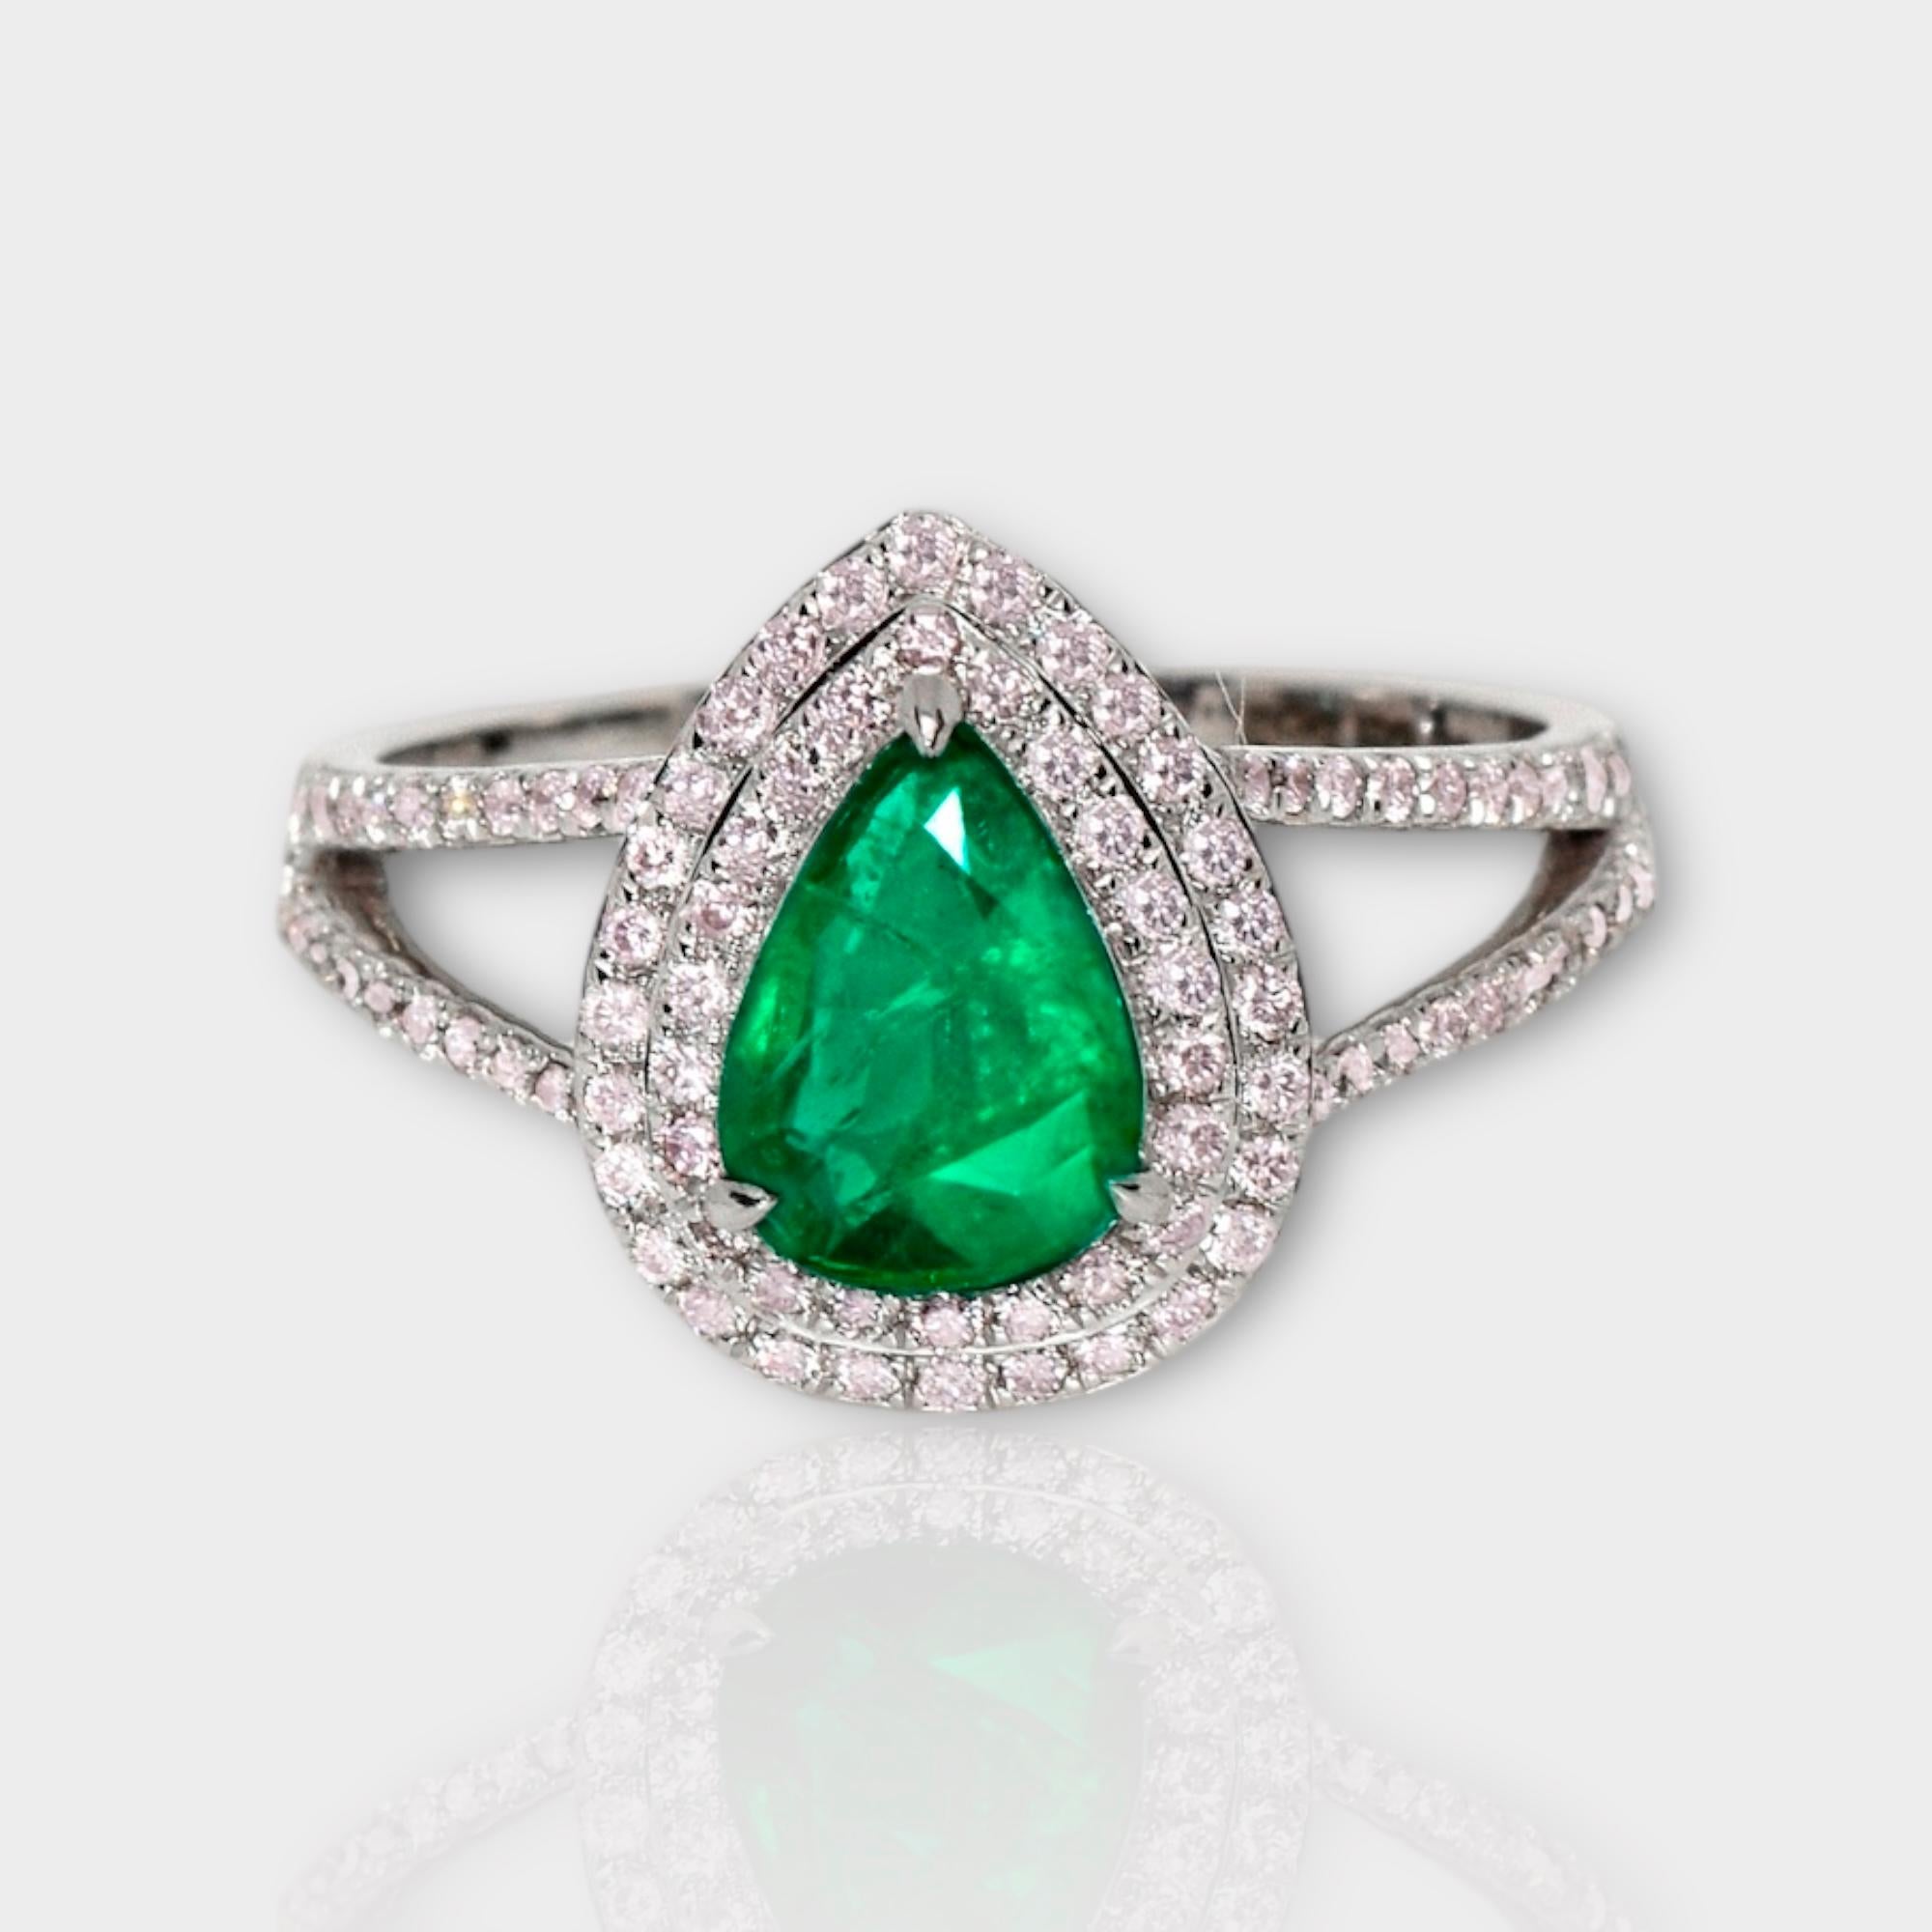 *IGI 14K White Gold 0.80 ct Emerald&Pink Diamonds Antique Art Deco Style Engagement Ring** 

A natural Zambia green emerald weighing 0.80 ct is set on a 14K white gold arc deco design band with natural pink diamonds weighing 0.42 ct.

The